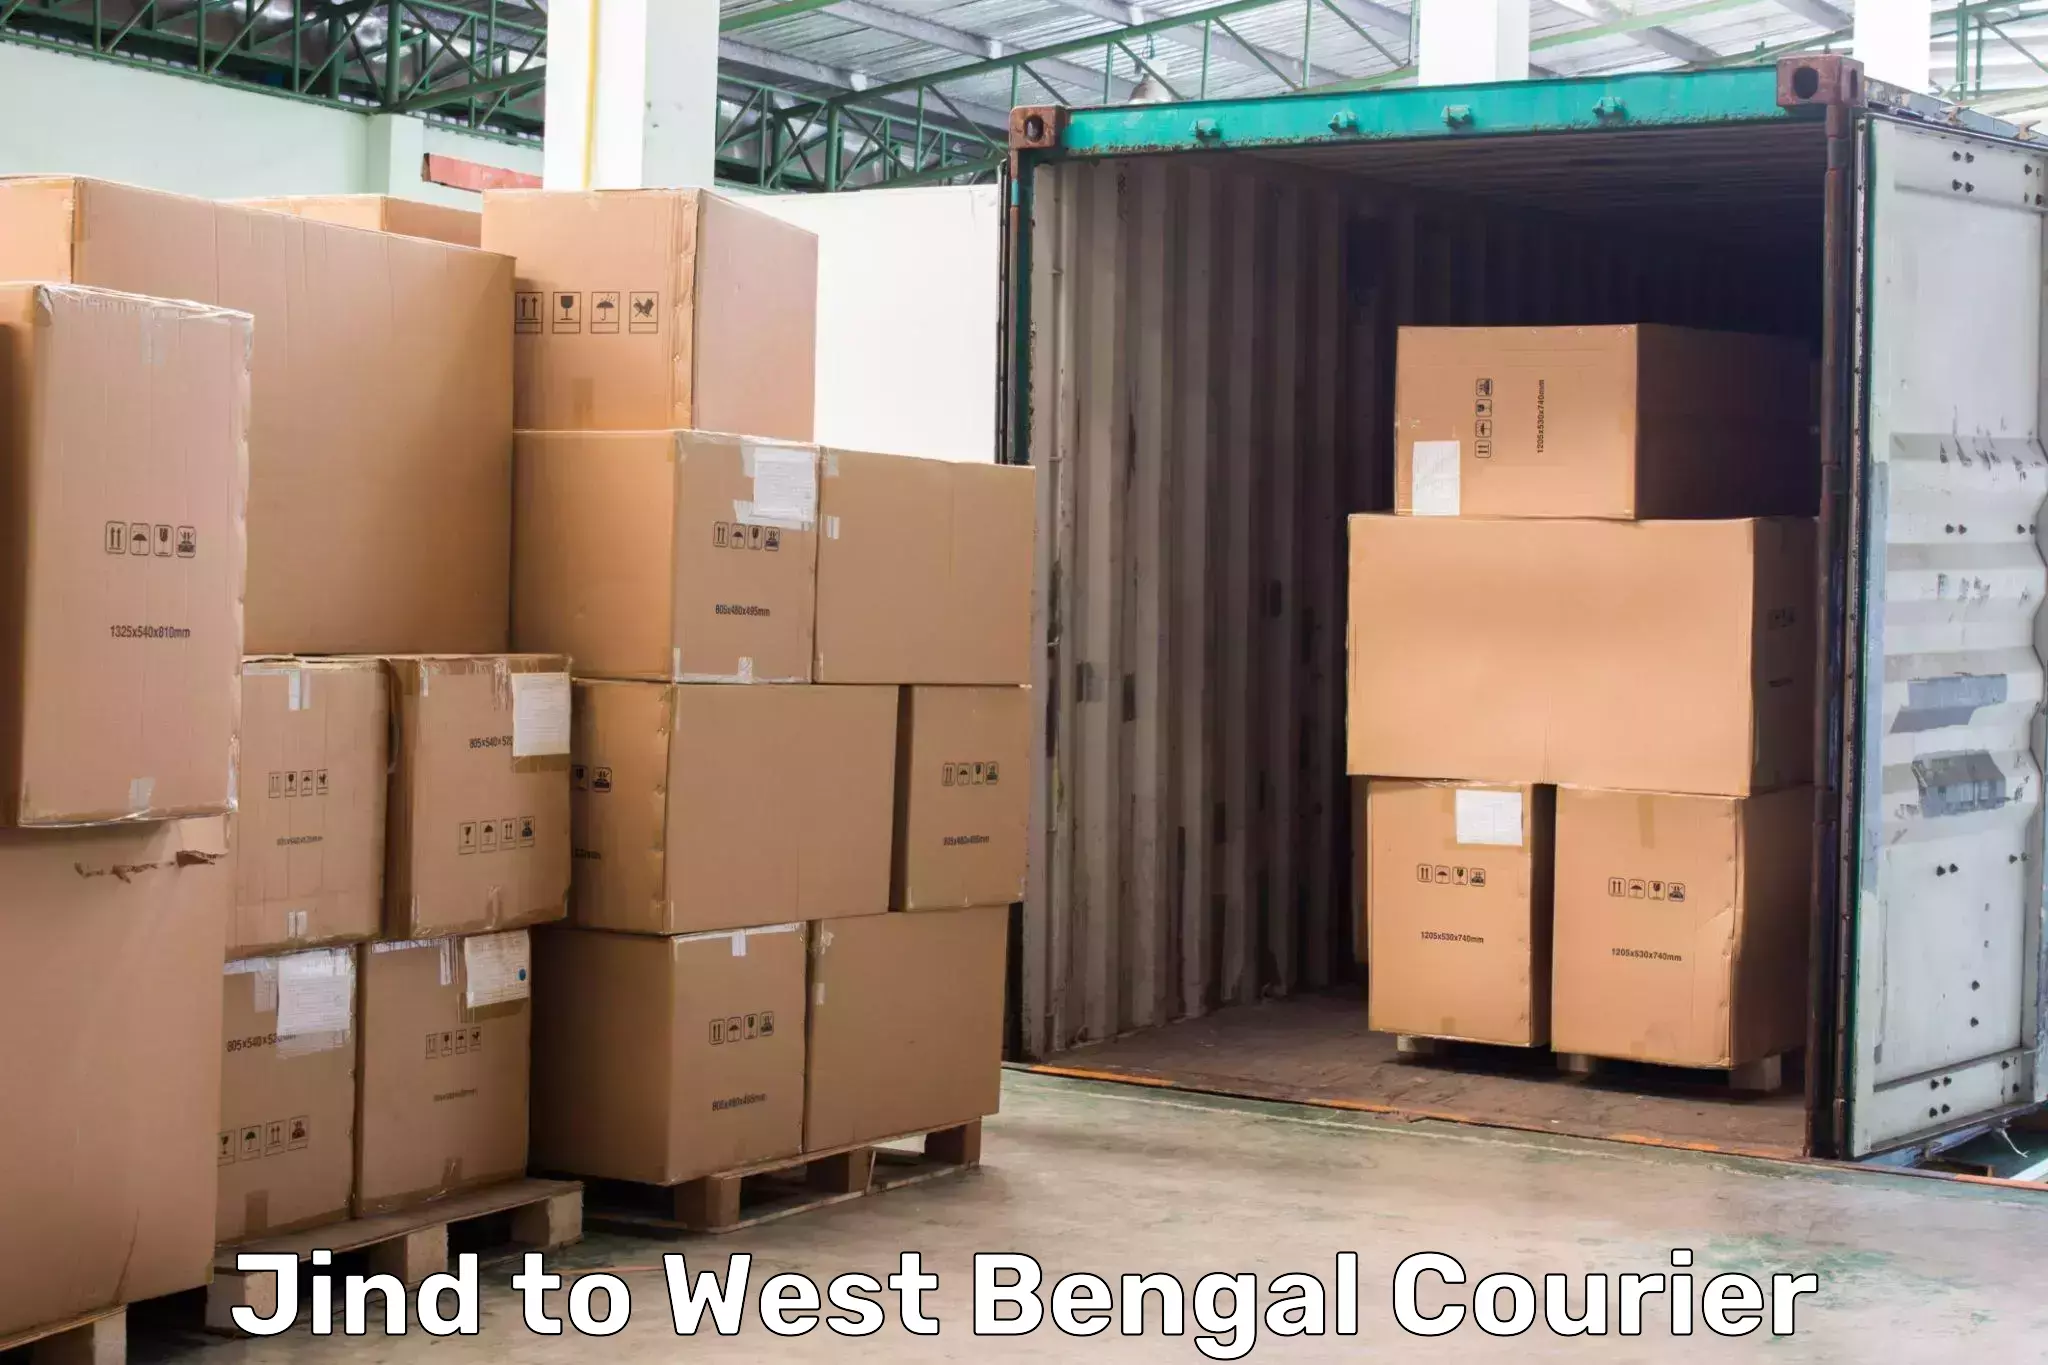 Express delivery capabilities Jind to Kolkata Port